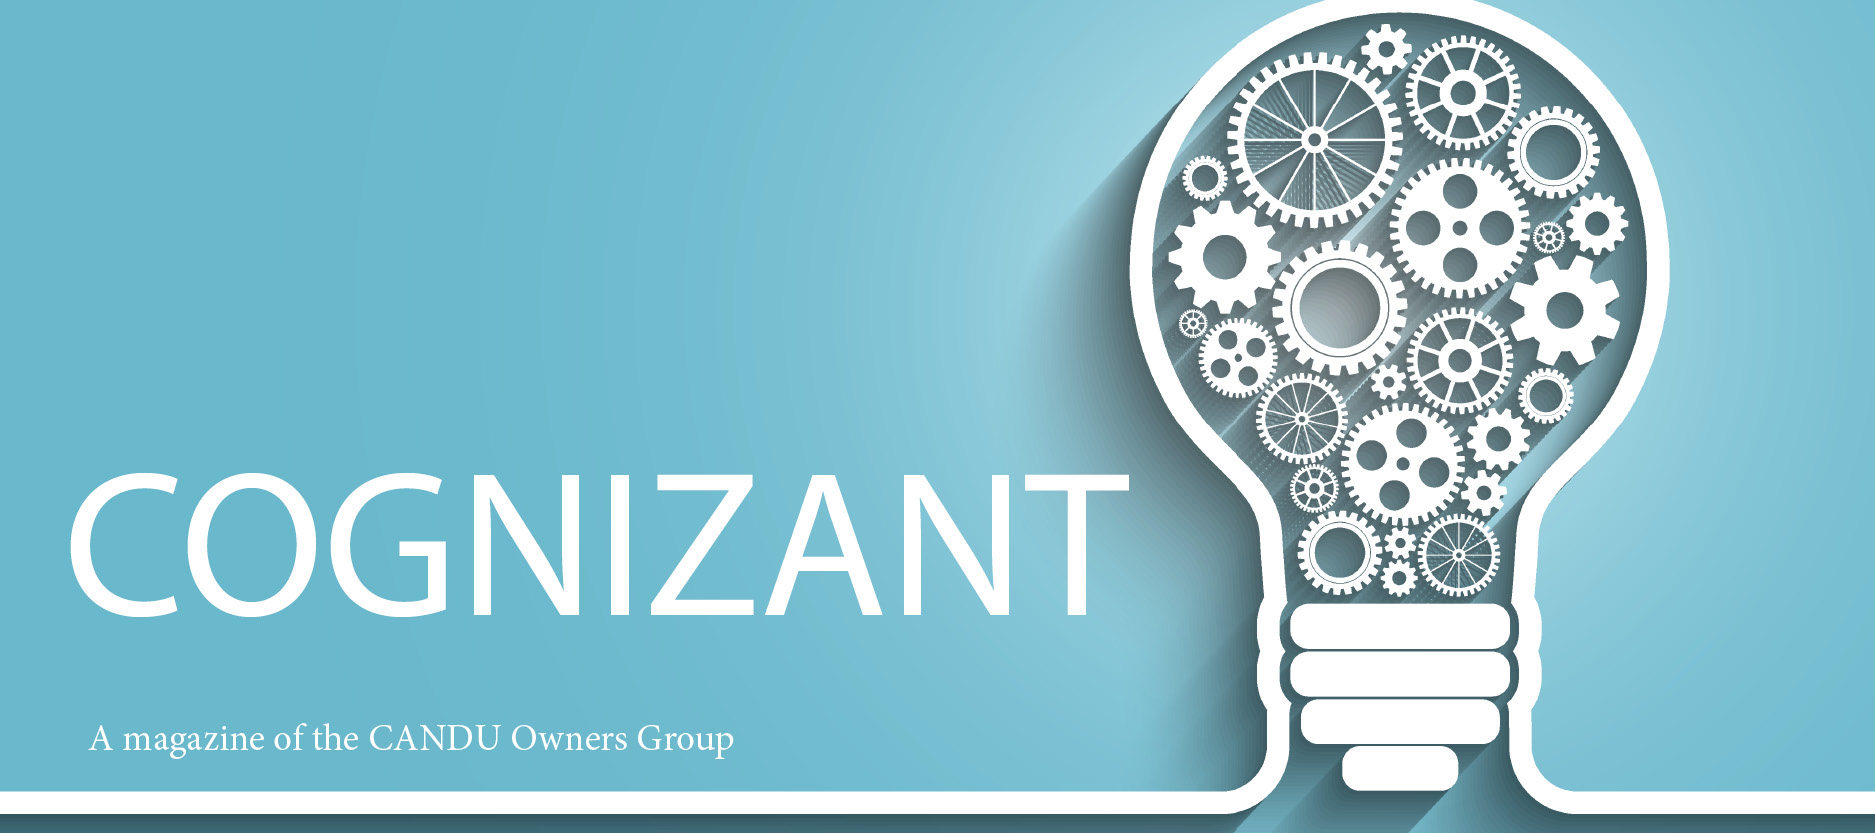 COGnizant: A magazine of the CANDU Owners Group